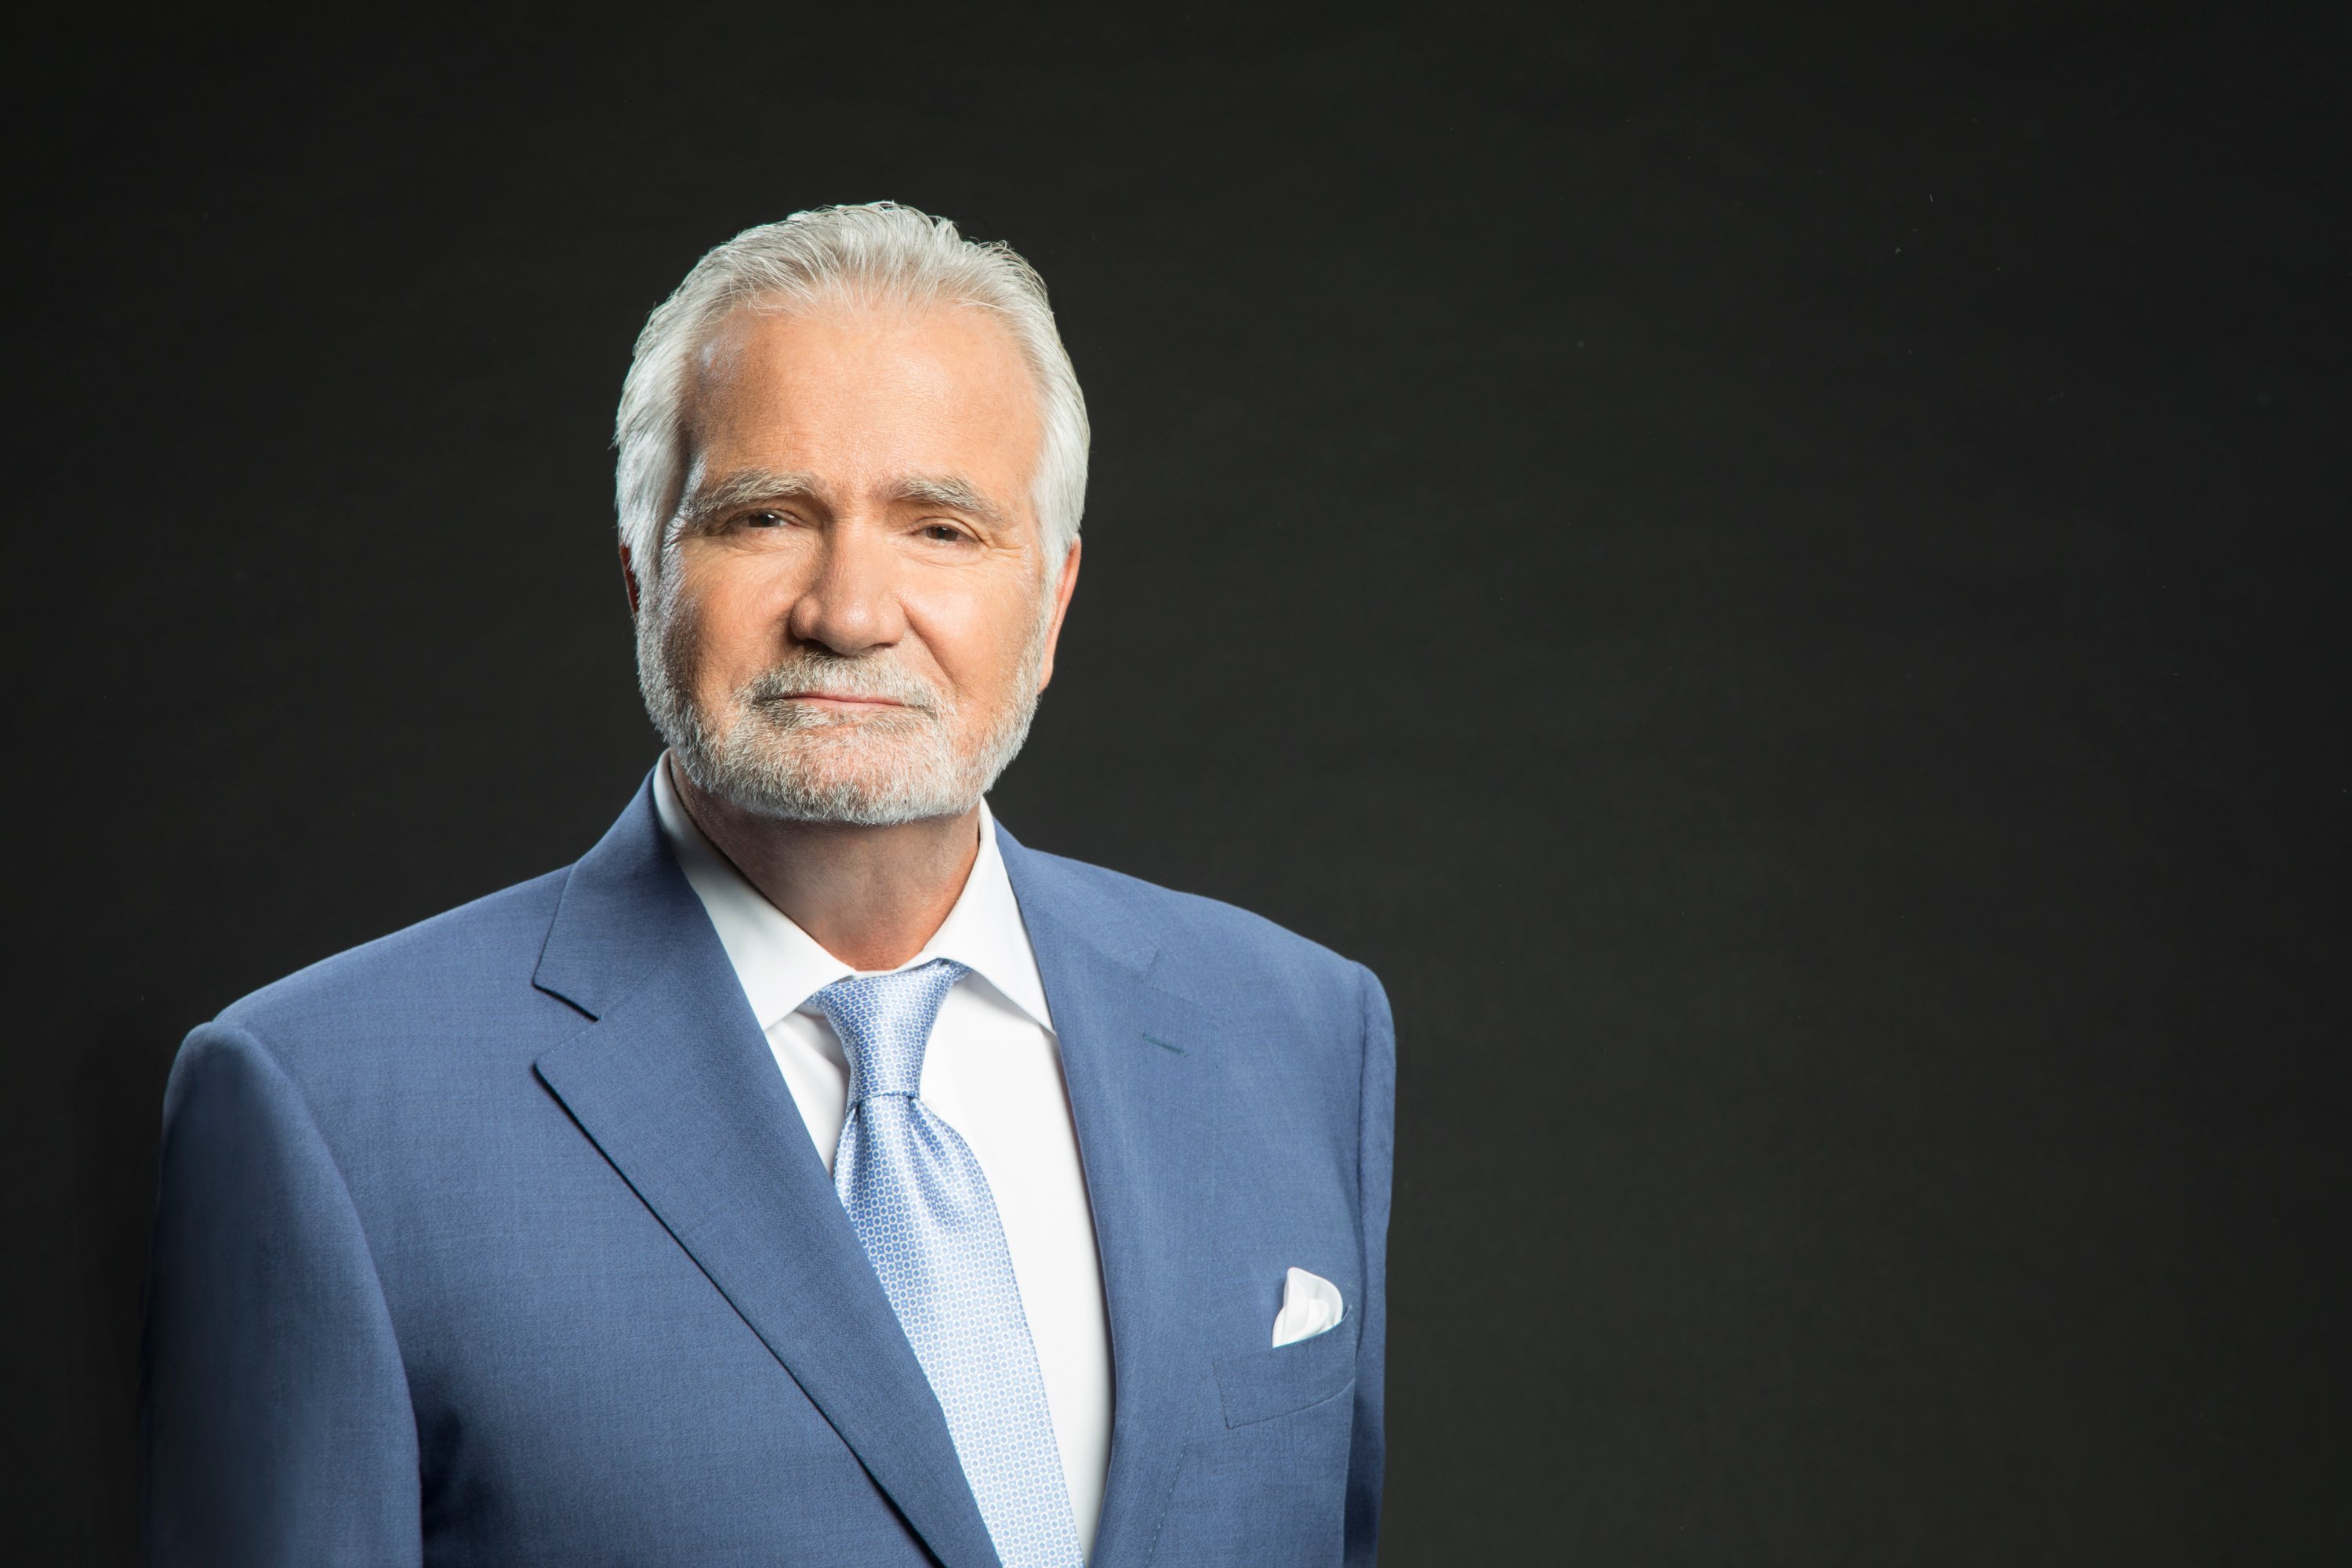 'The Bold and the Beautiful' actor John McCook in a white shirt and blue suit and tie standing in front of a black backdrop.